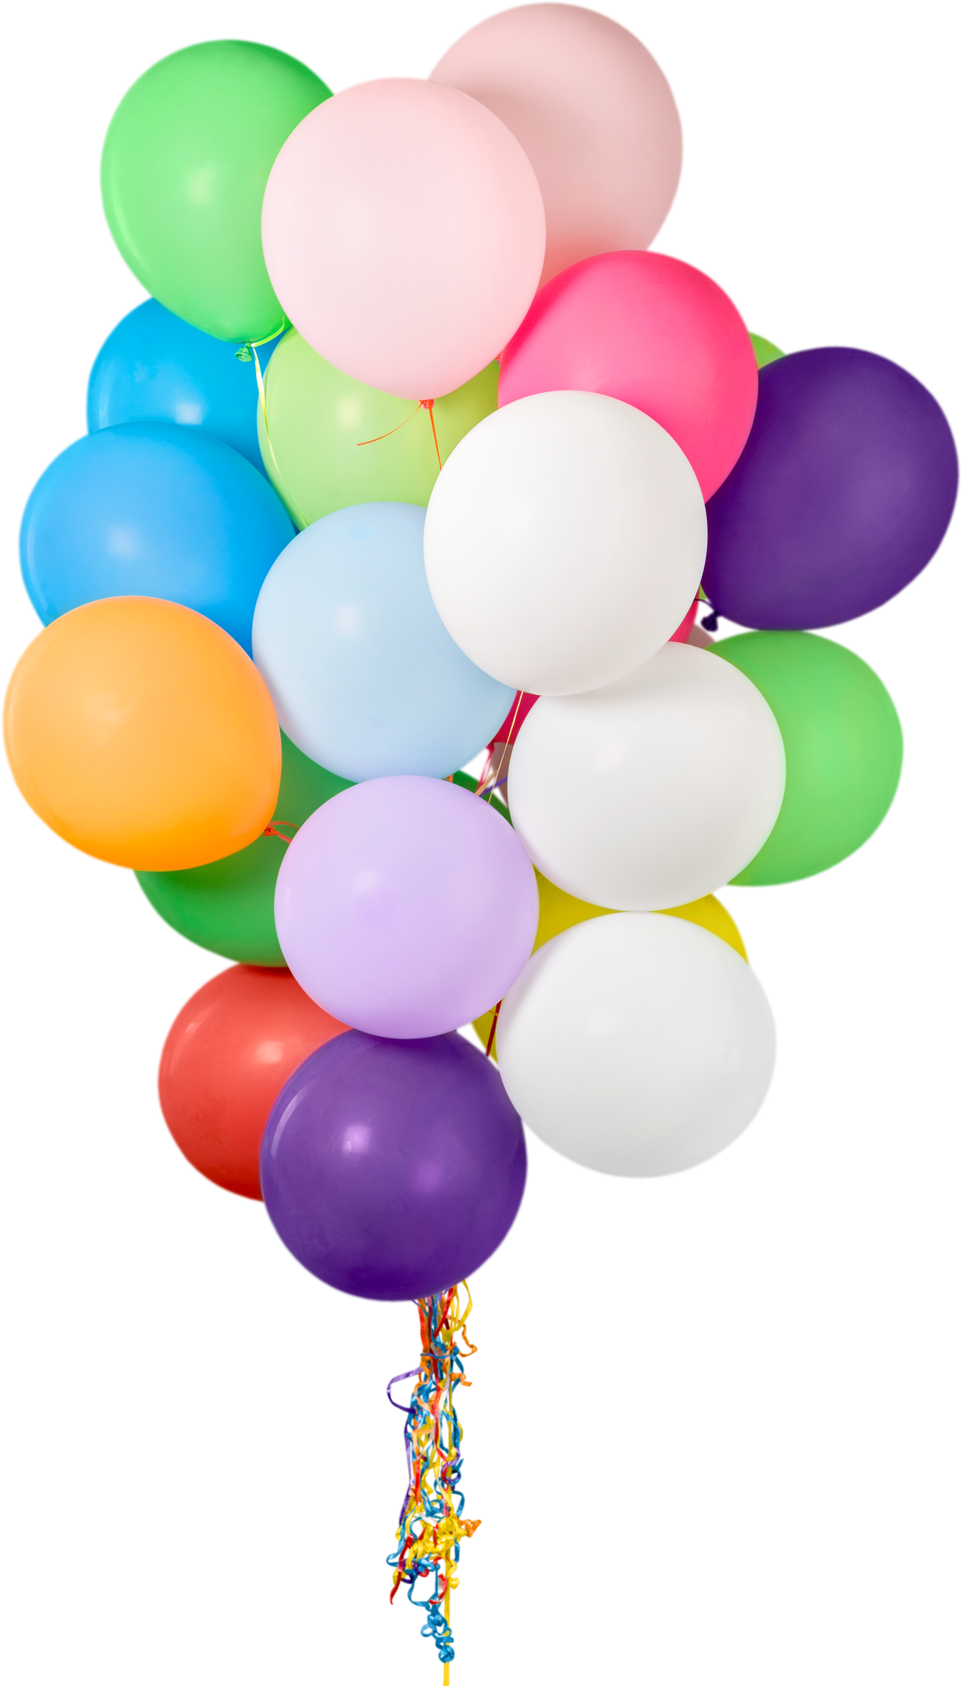 Colorful Helium Balloons